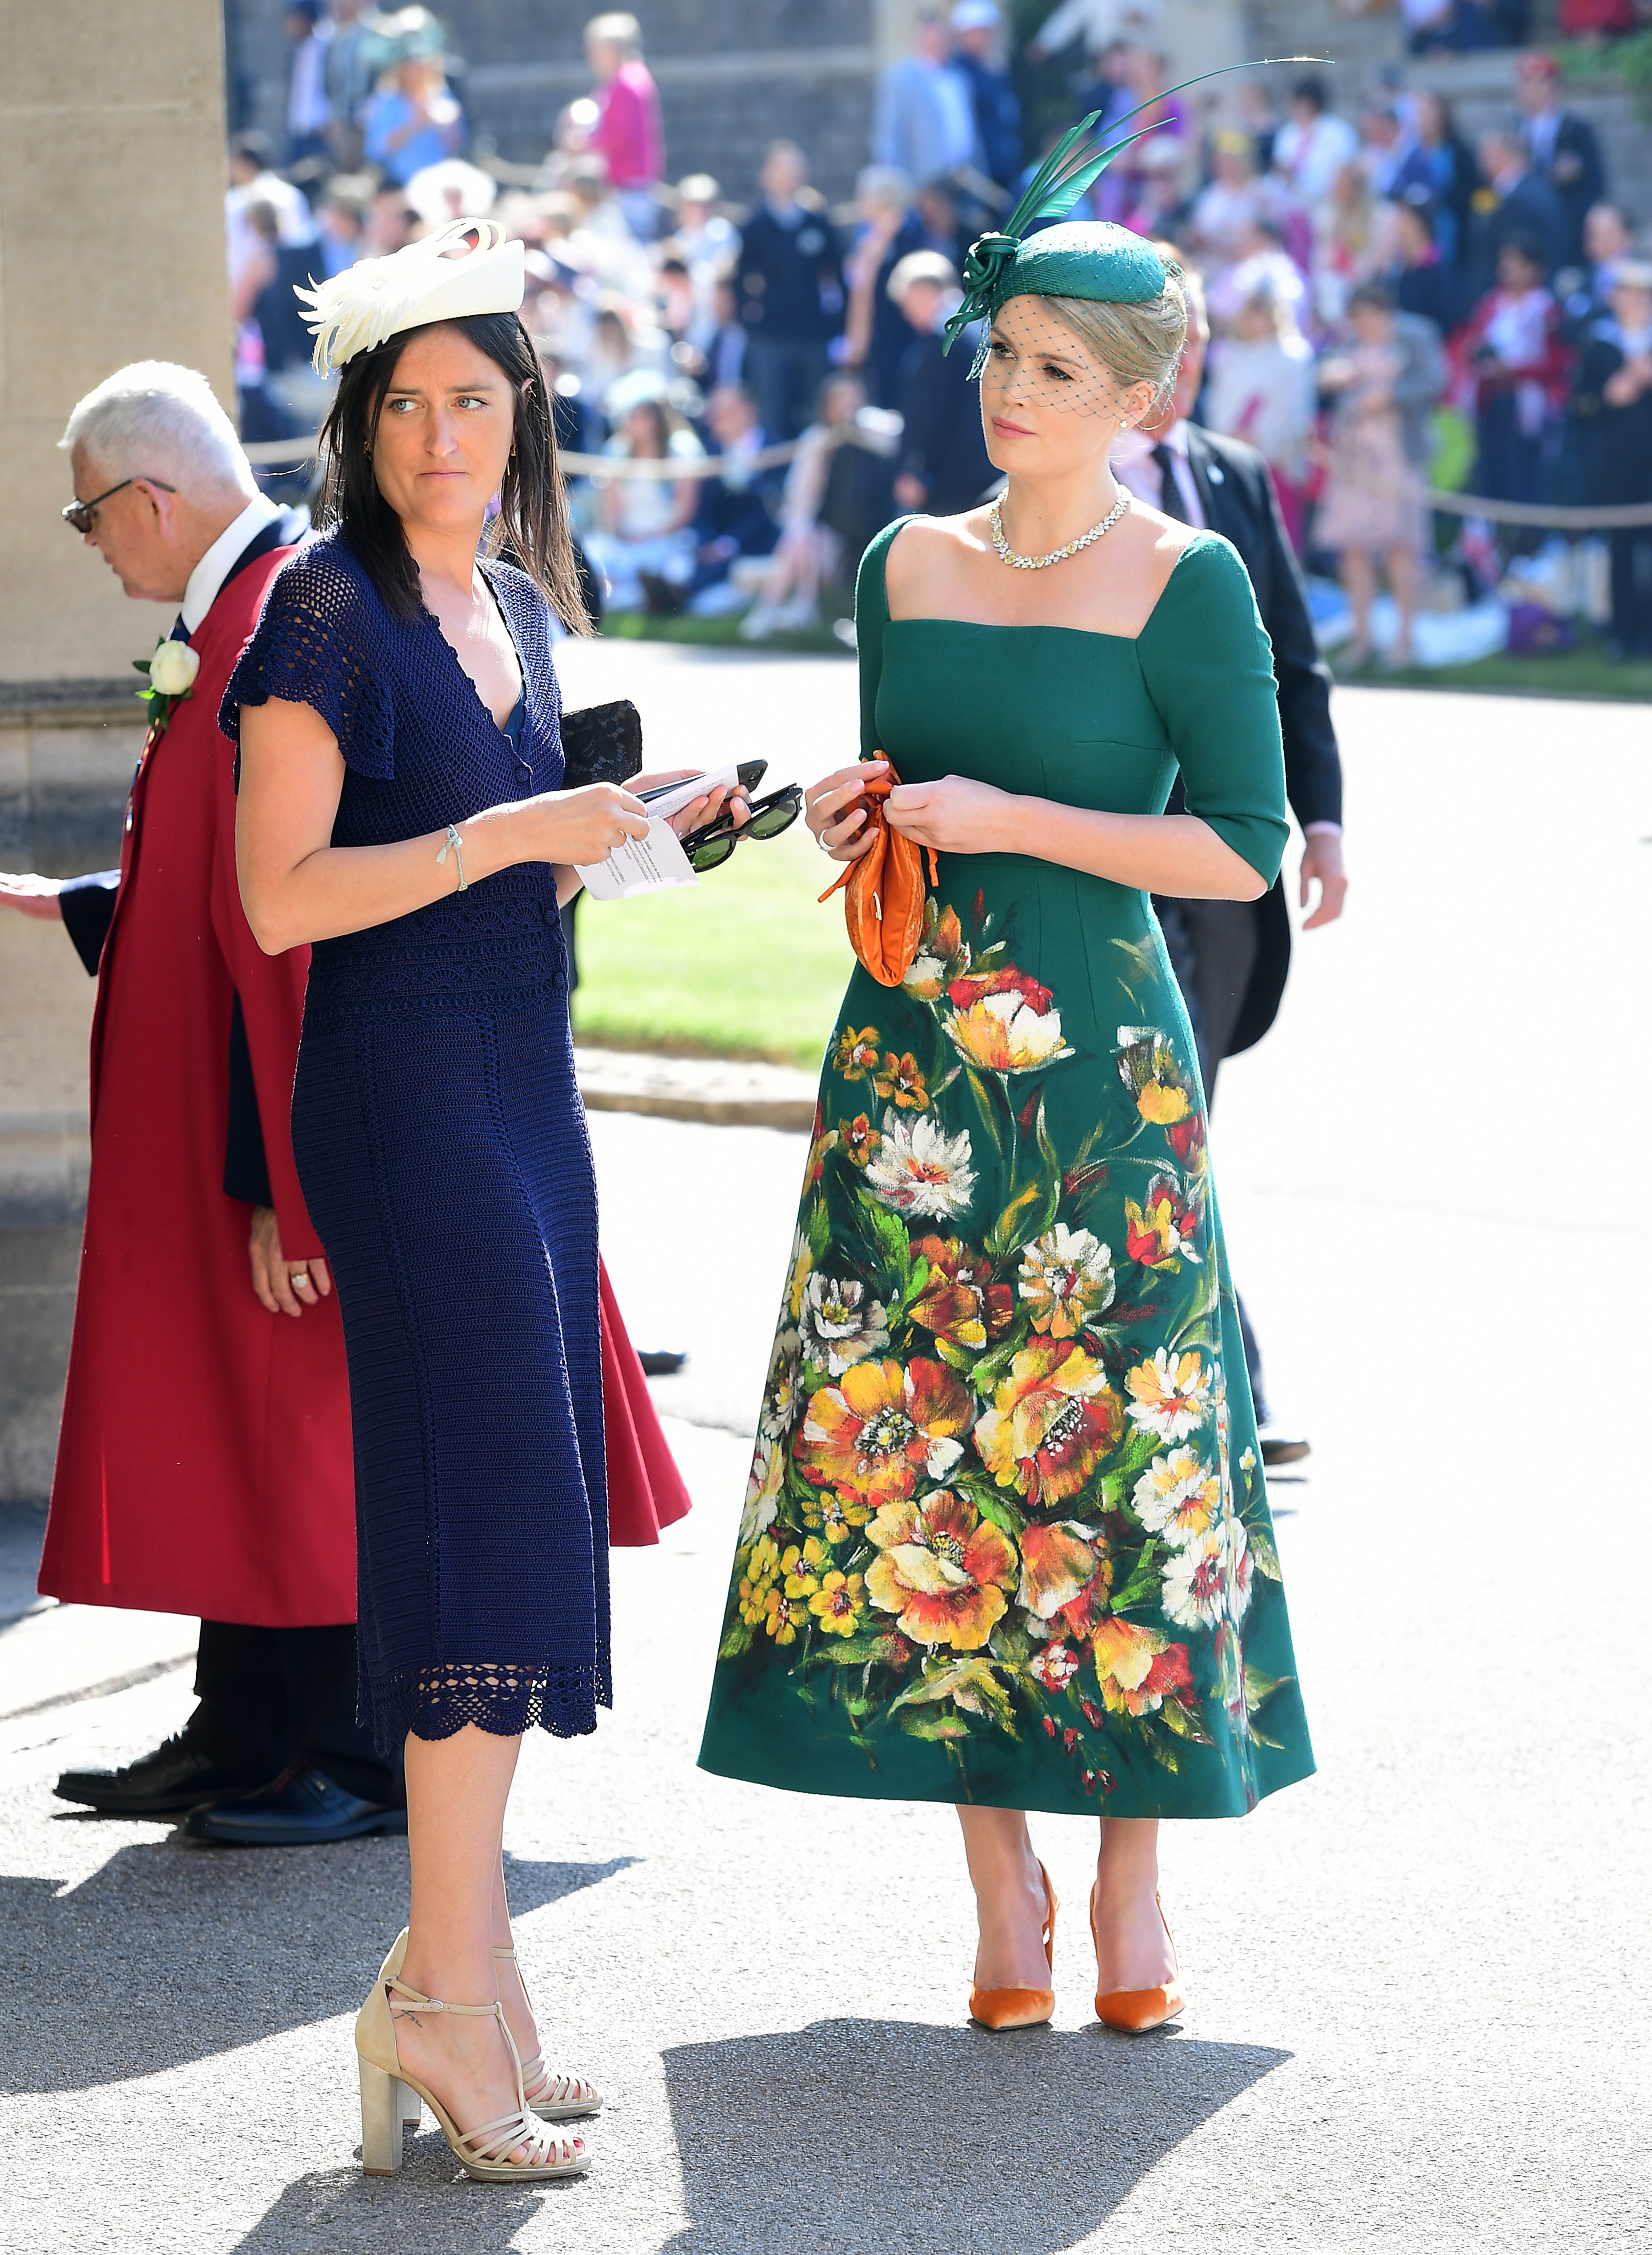 Lady Kitty Spencer (right) arrives at St George's Chapel at Windsor Castle for the wedding of Meghan Markle and Prince Harry.